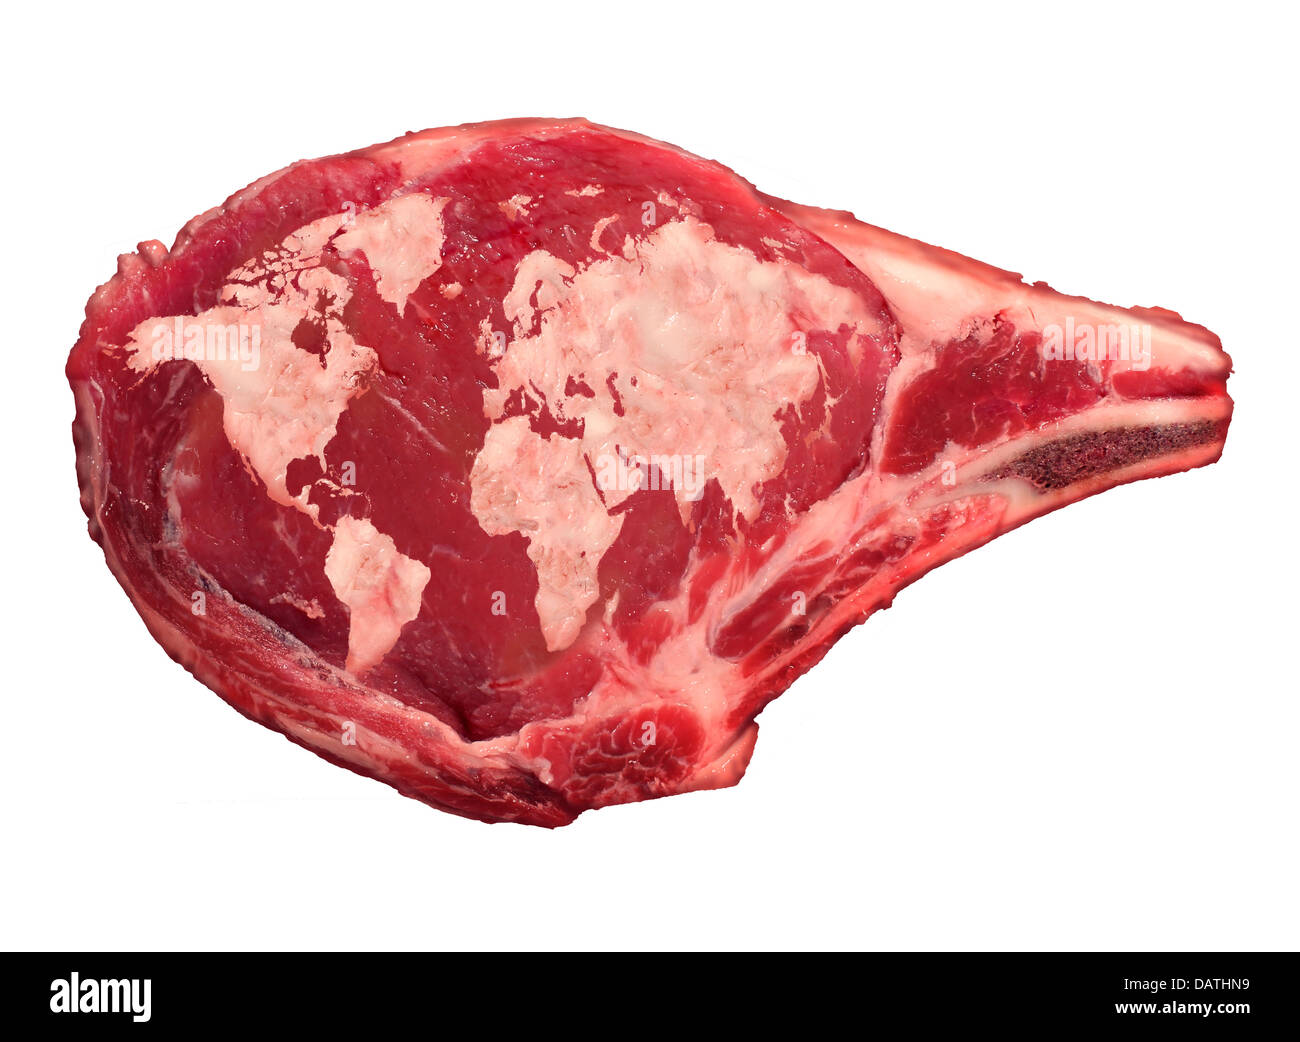 Global meat industry and world beef production food concept as a raw red  rib steak with the animal fat in the shape of a map of Stock Photo - Alamy